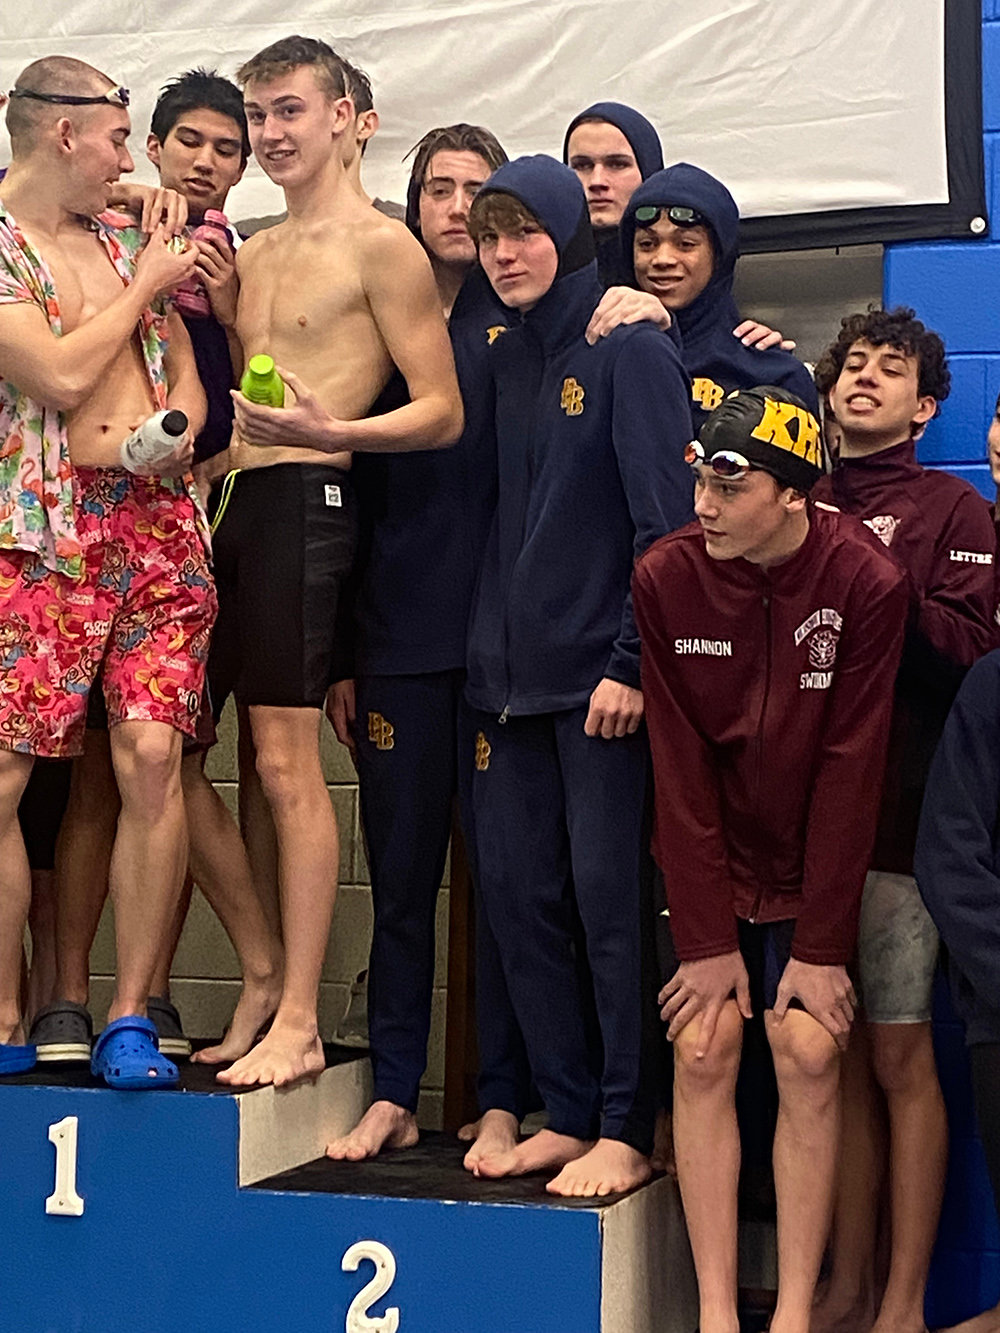 Pine Bush's 200-yard medley relay team finished second in the 200-yard medley relay during Saturday's Section 9 boys' swimming championship meet at Valley Central High School in Montgomery.